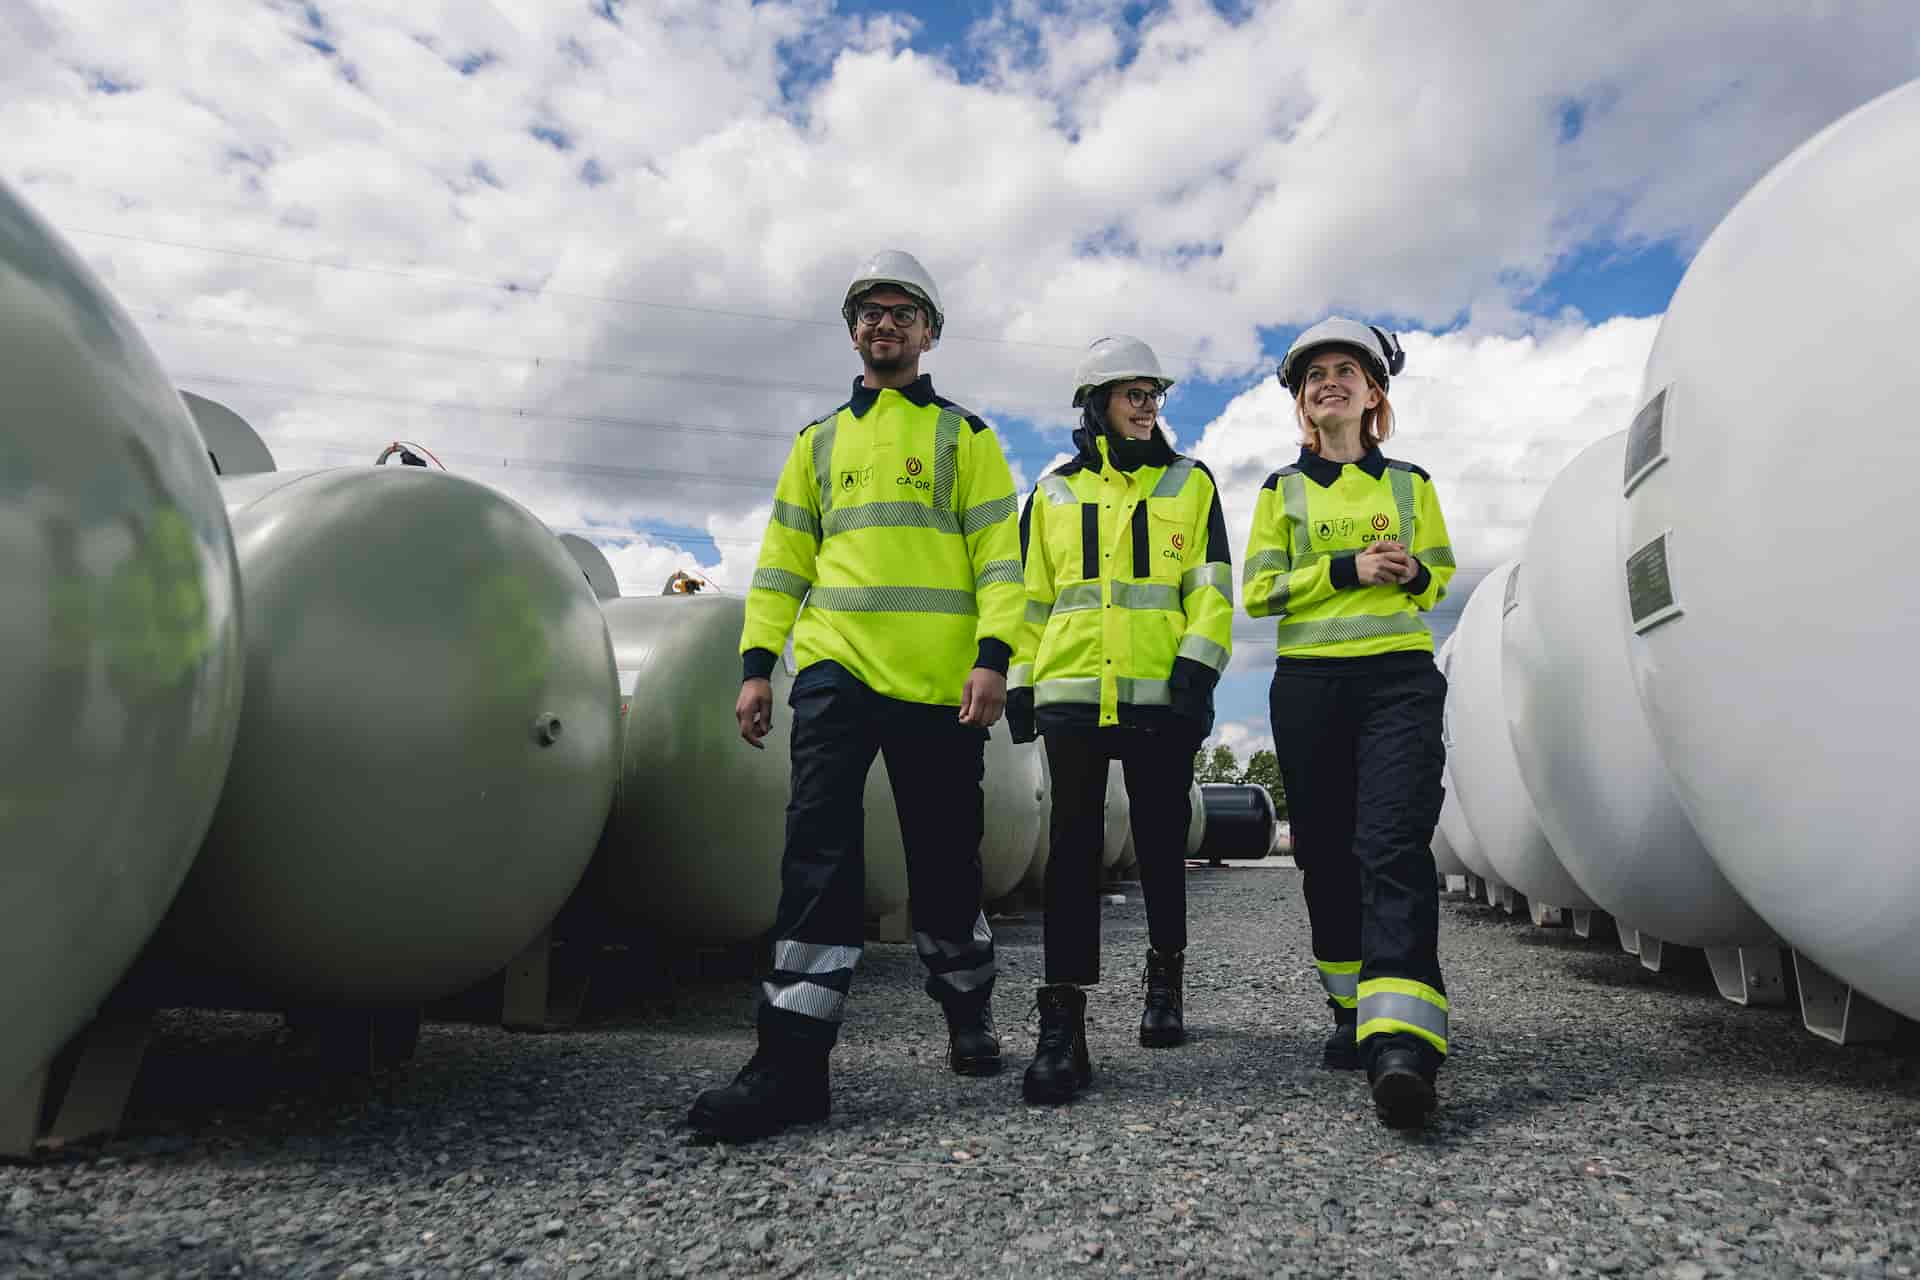 Three Calor colleagues walking amongst gas tanks wearing safety gear